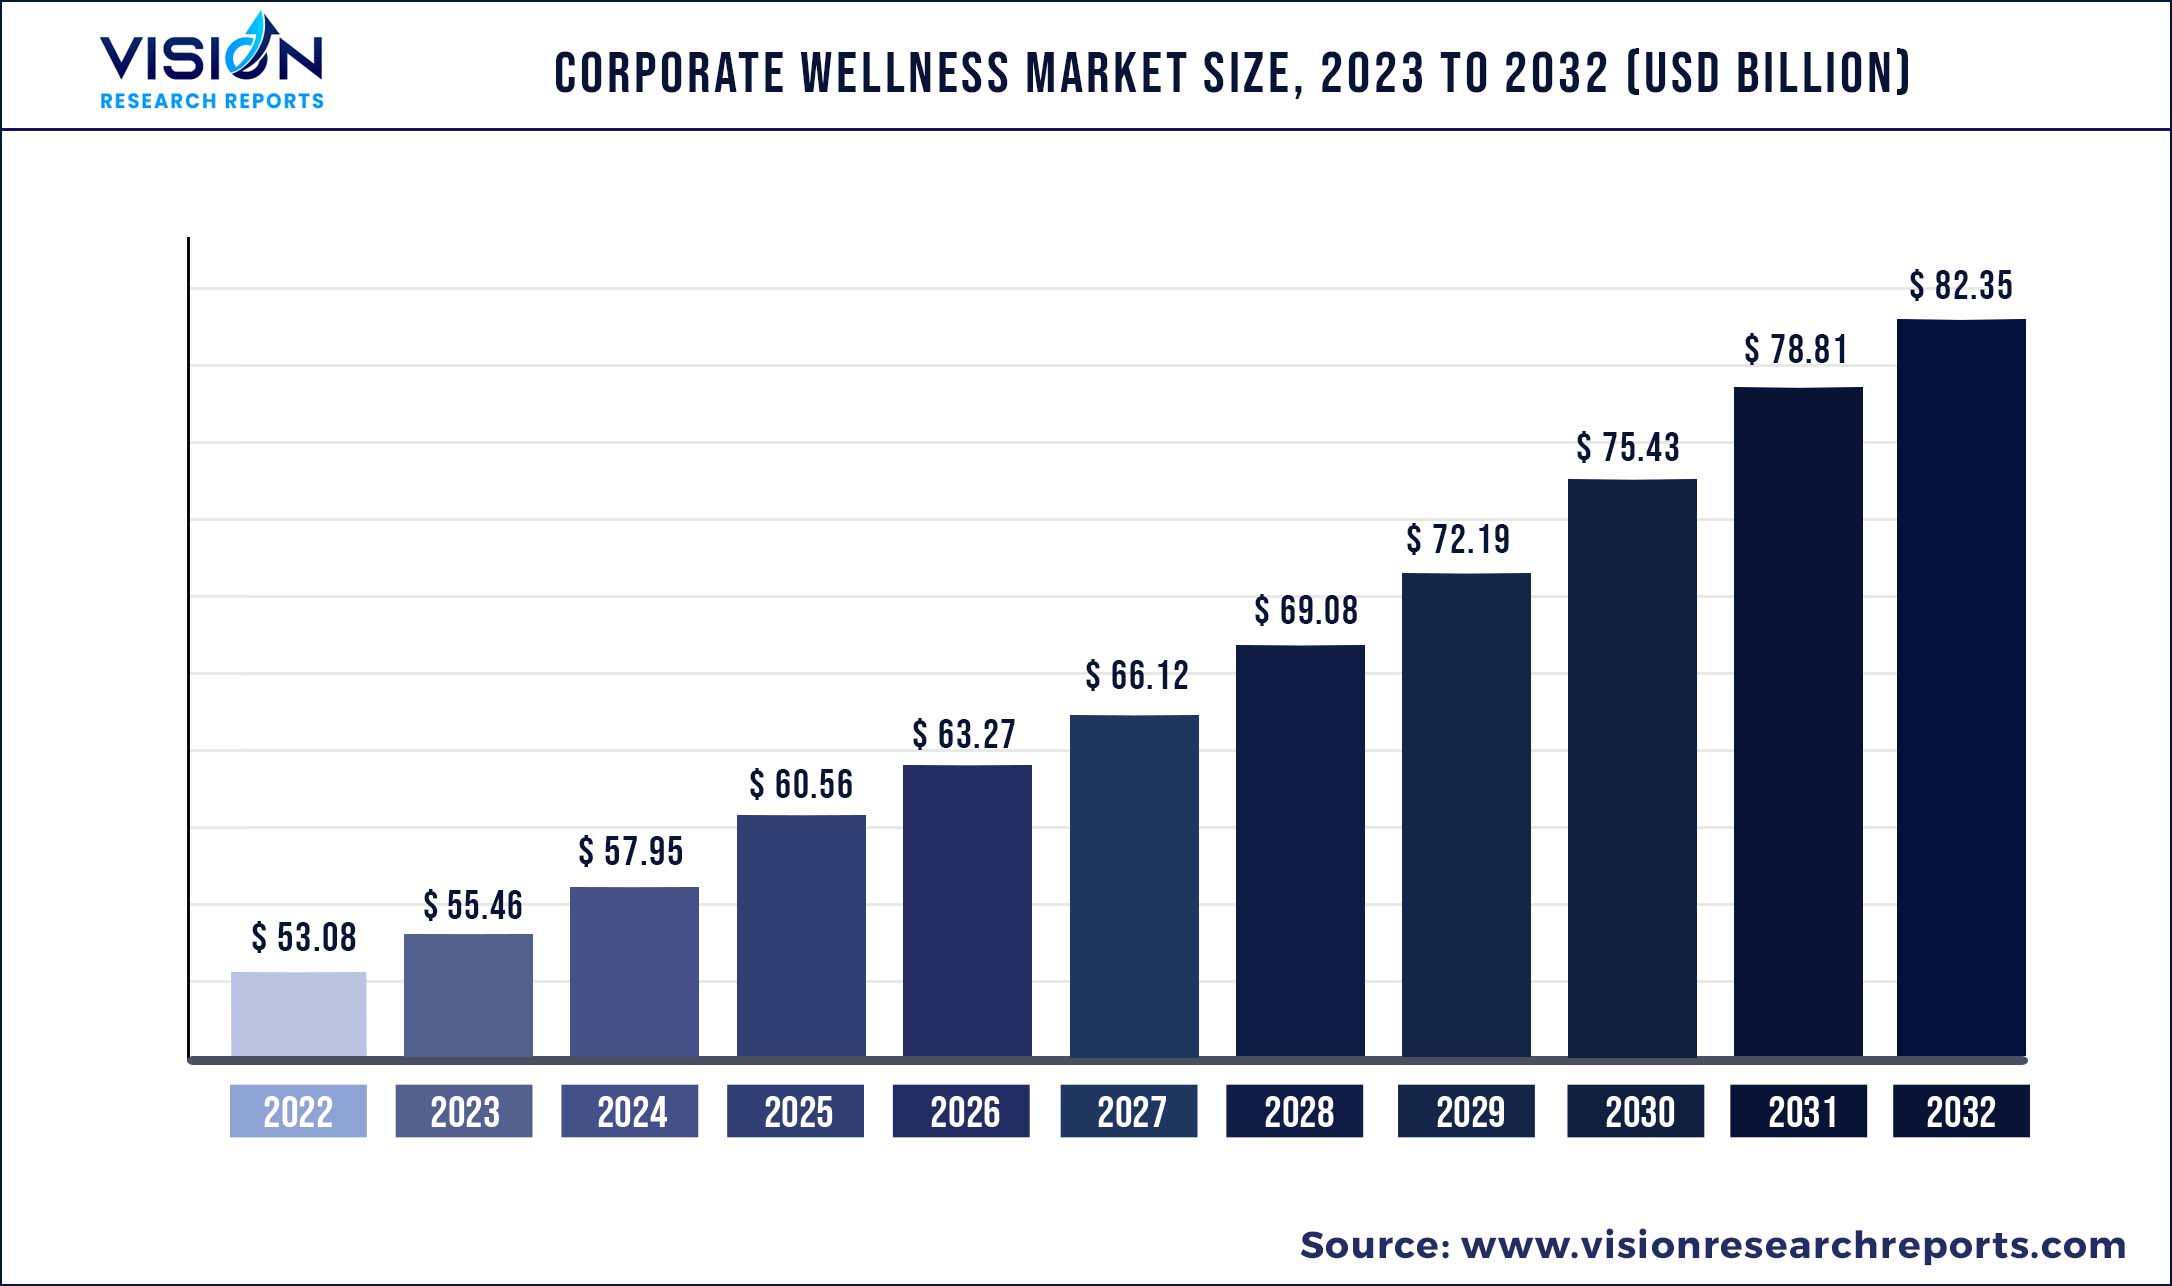 Corporate Wellness Market Size 2023 to 2032